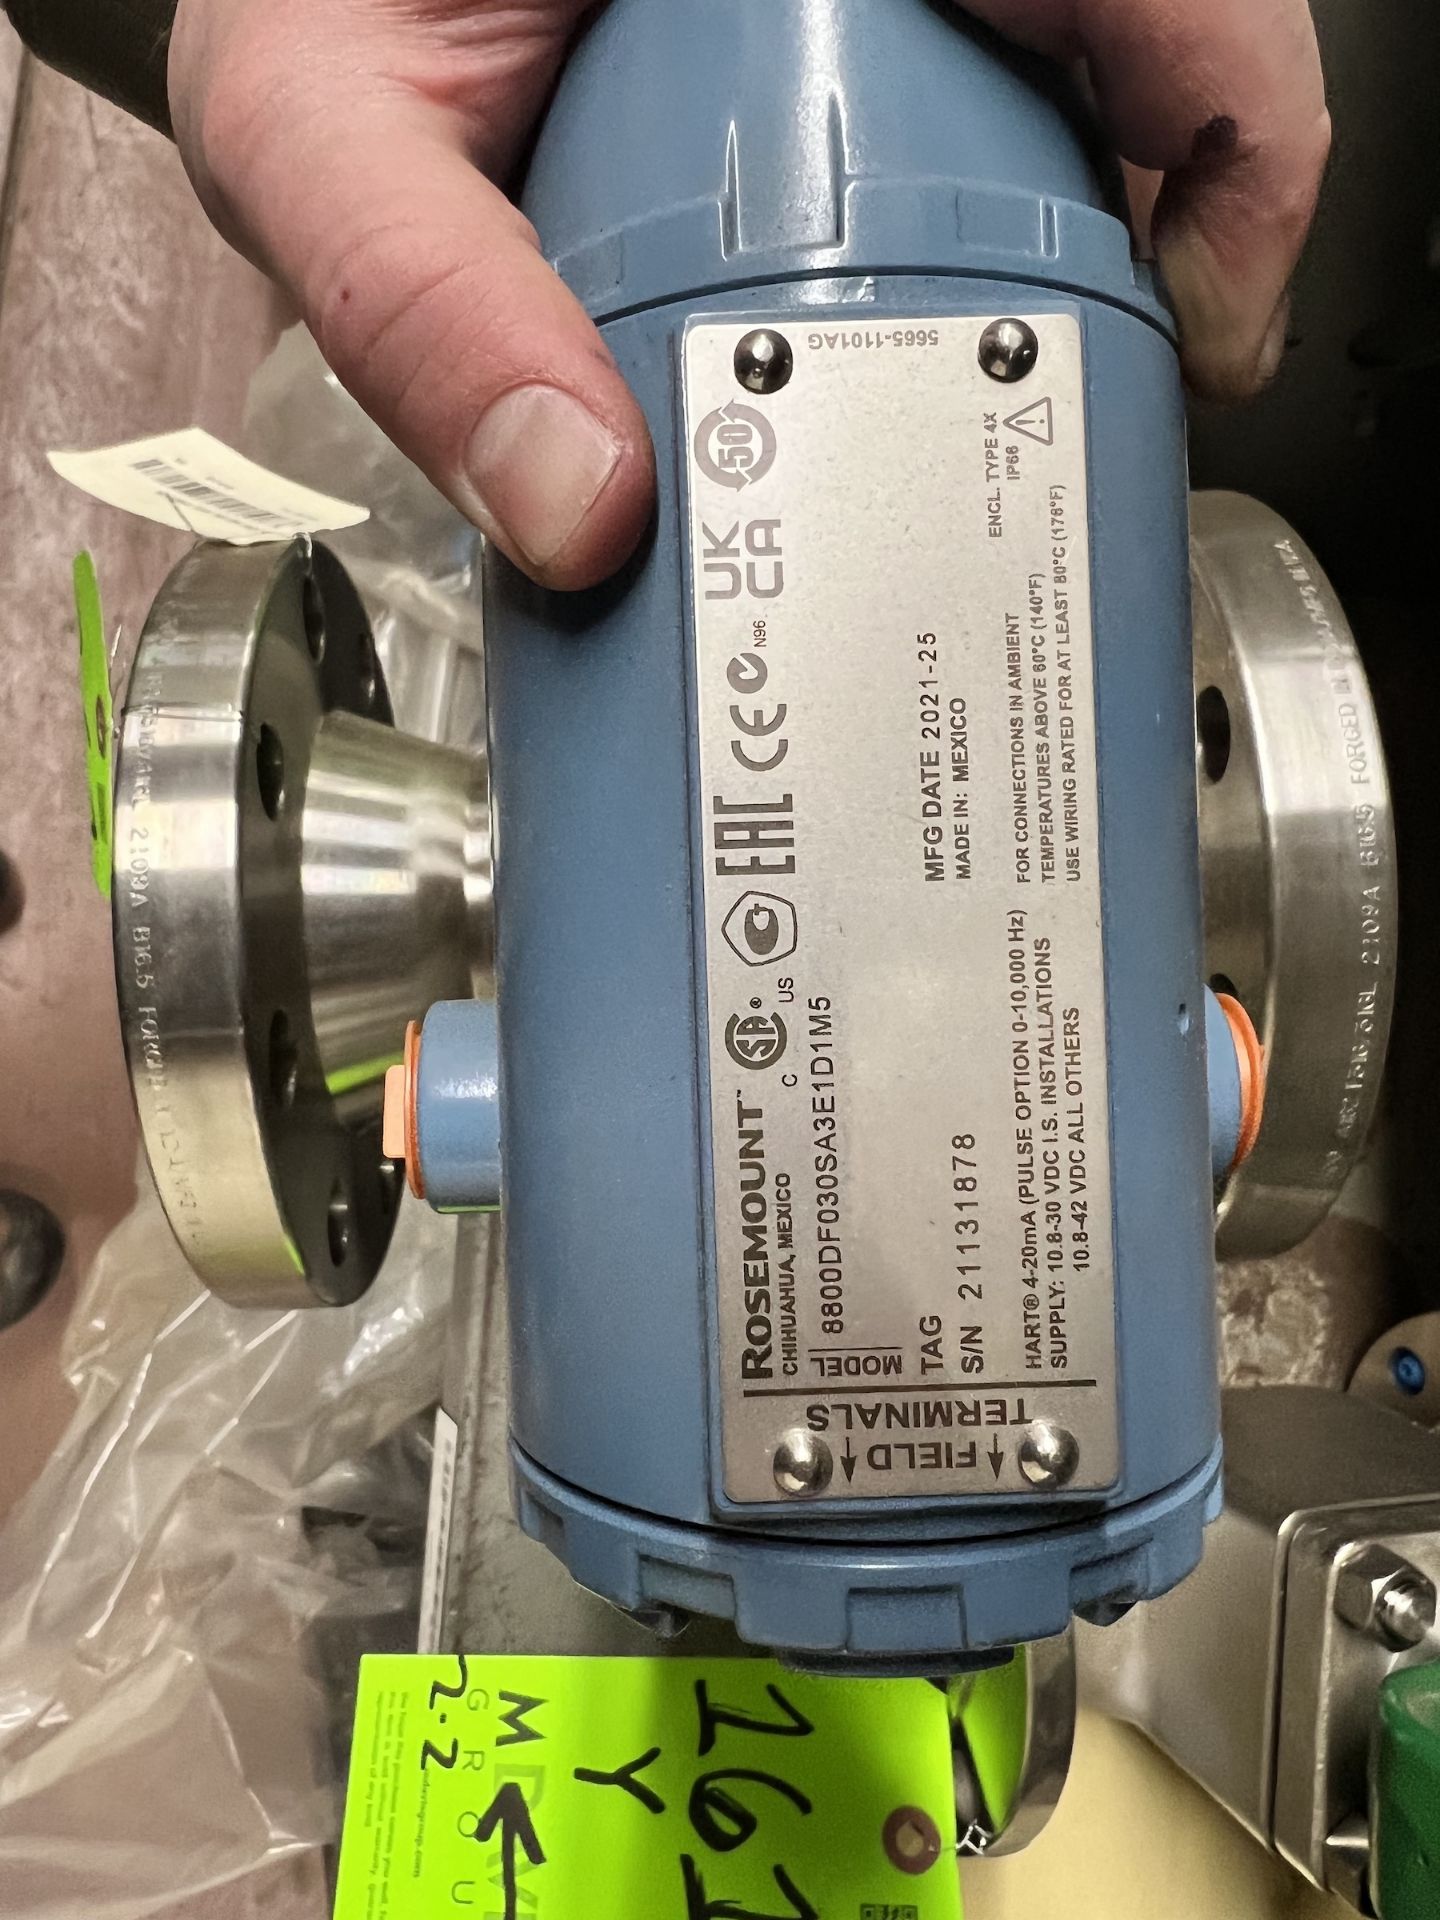 ASSORTED MRO INCLUDING: EMERSON FLOW METER, MODEL 8800 AND BAUMANN CONTROL VALVE, 1.5” 19CV SIZE 32 - Image 7 of 9